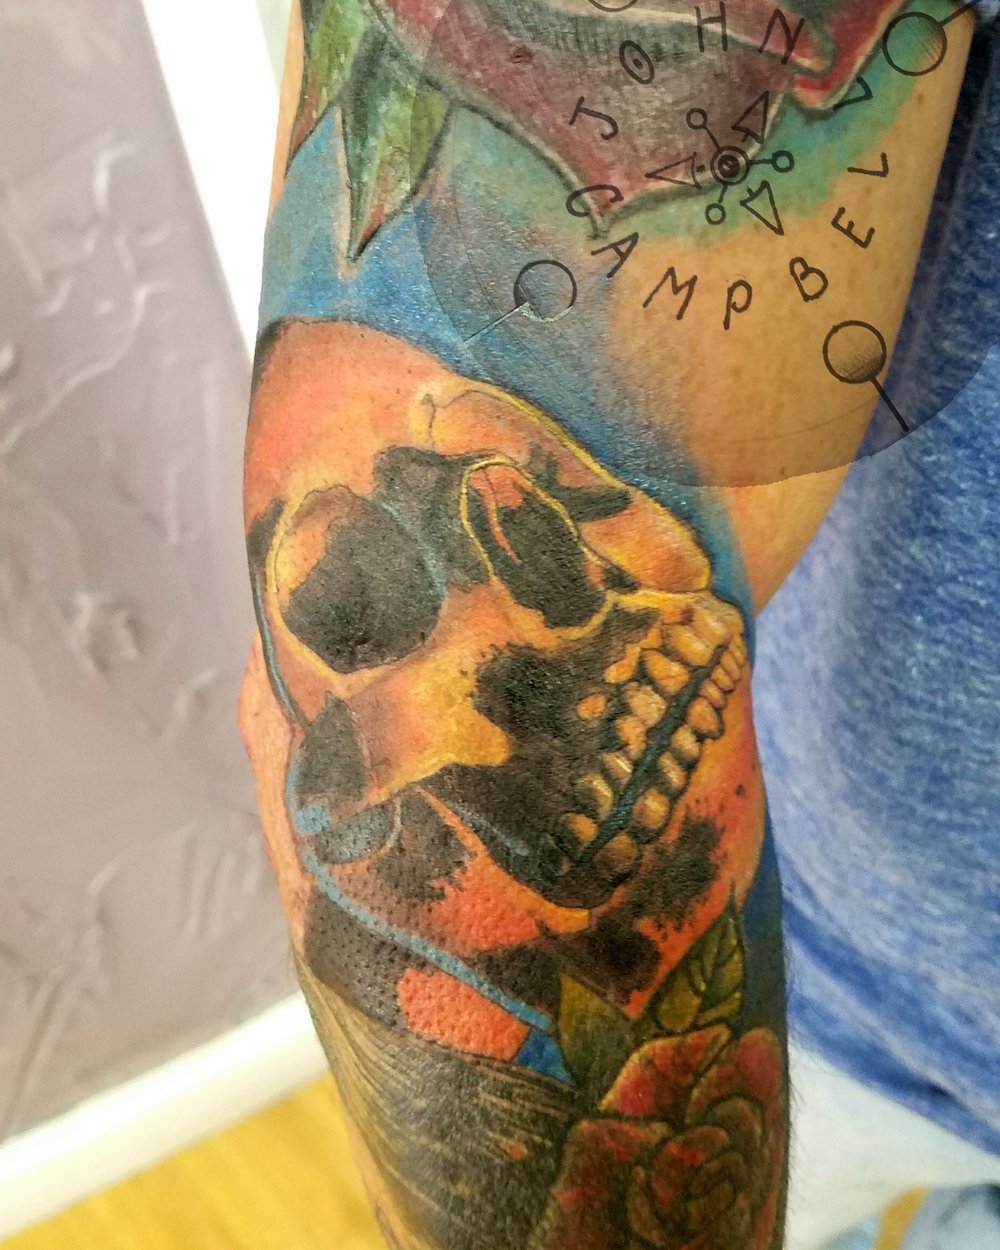 Color Skull Tattoo done by Tattoo Artist John Campbell at Sacred Mandala Studio - Premium Custom Tattoos and Art Gallery in the Triangle - Raleigh, Durham and Chapel Hill, NC.